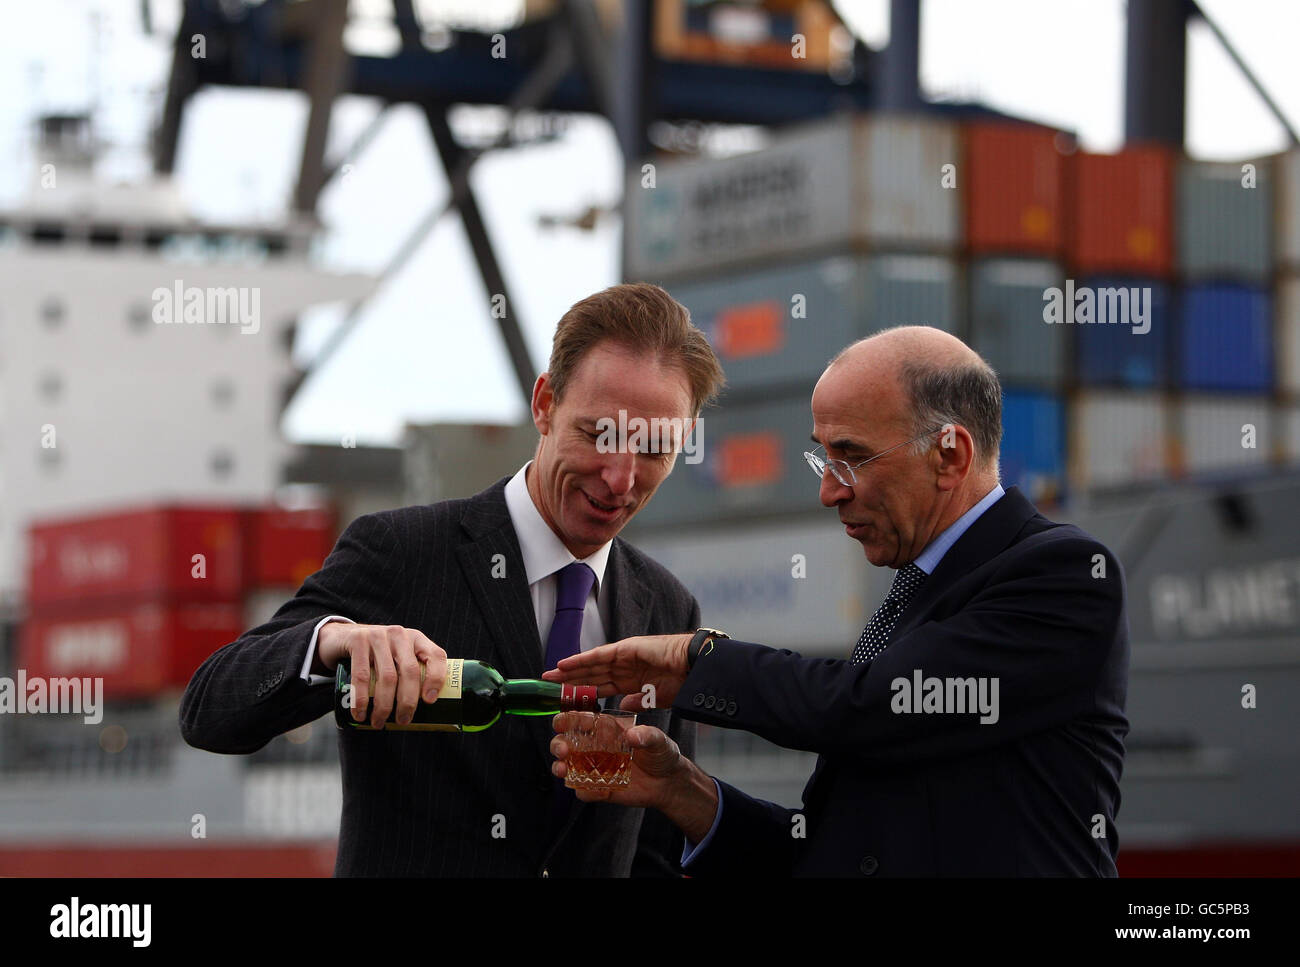 Scottish Secretary Jim Murphy (right) pours a glass of whisky with the chief executive of the Scotch Whisky Association Gavin Hewitt, as the new Scotch whisky regulations come into effect, at Grangemouth Docks, Falkirk, Scotland. Stock Photo